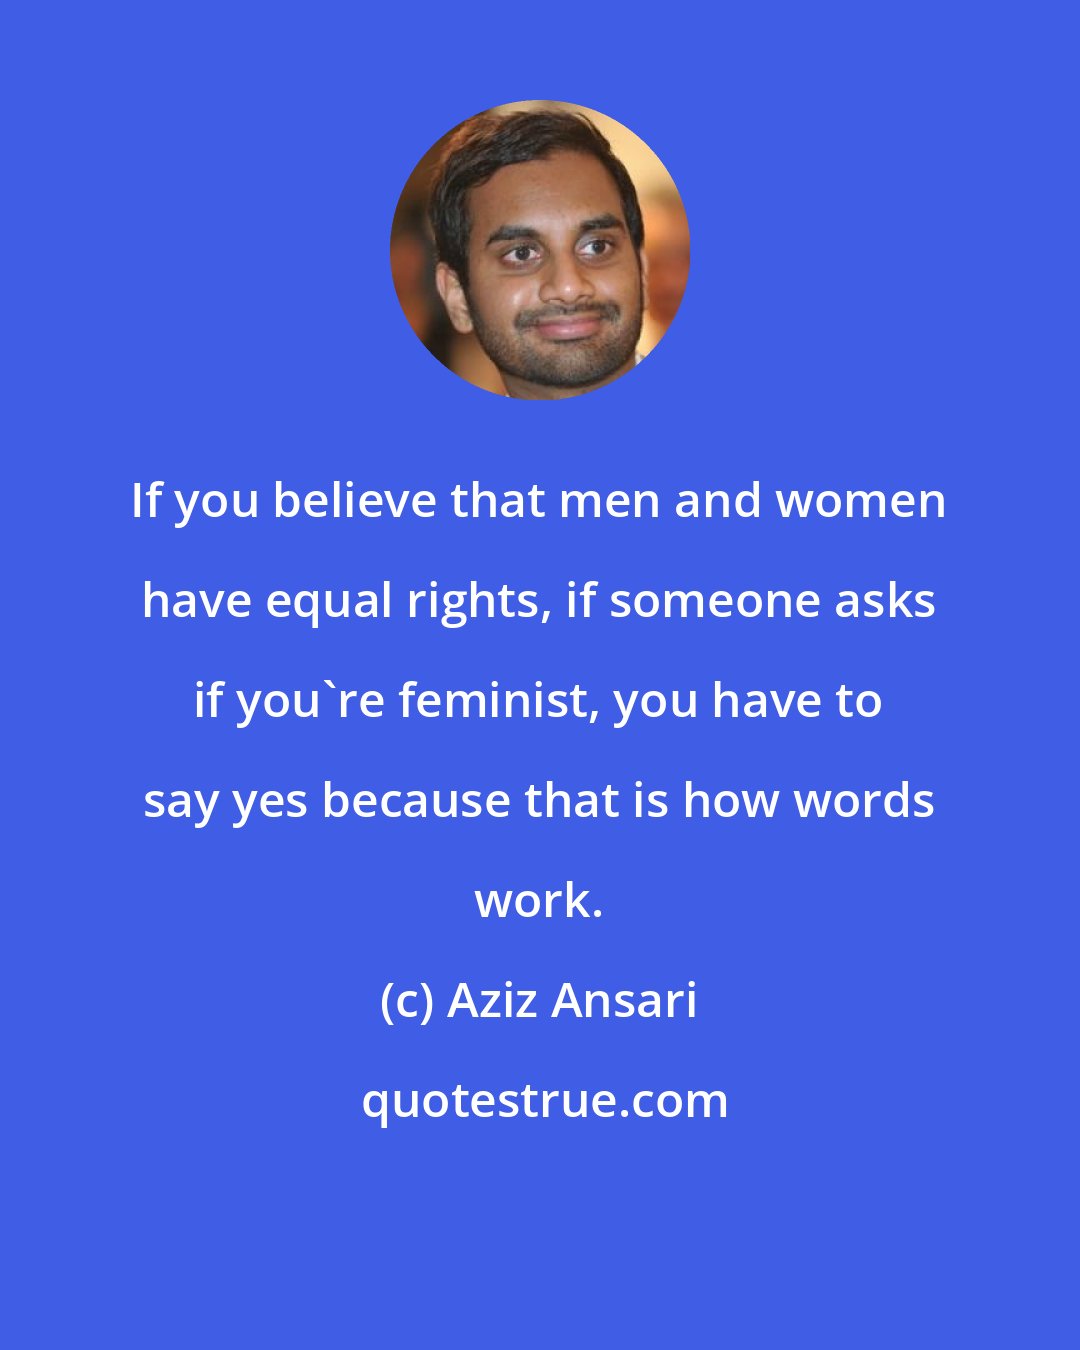 Aziz Ansari: If you believe that men and women have equal rights, if someone asks if you're feminist, you have to say yes because that is how words work.